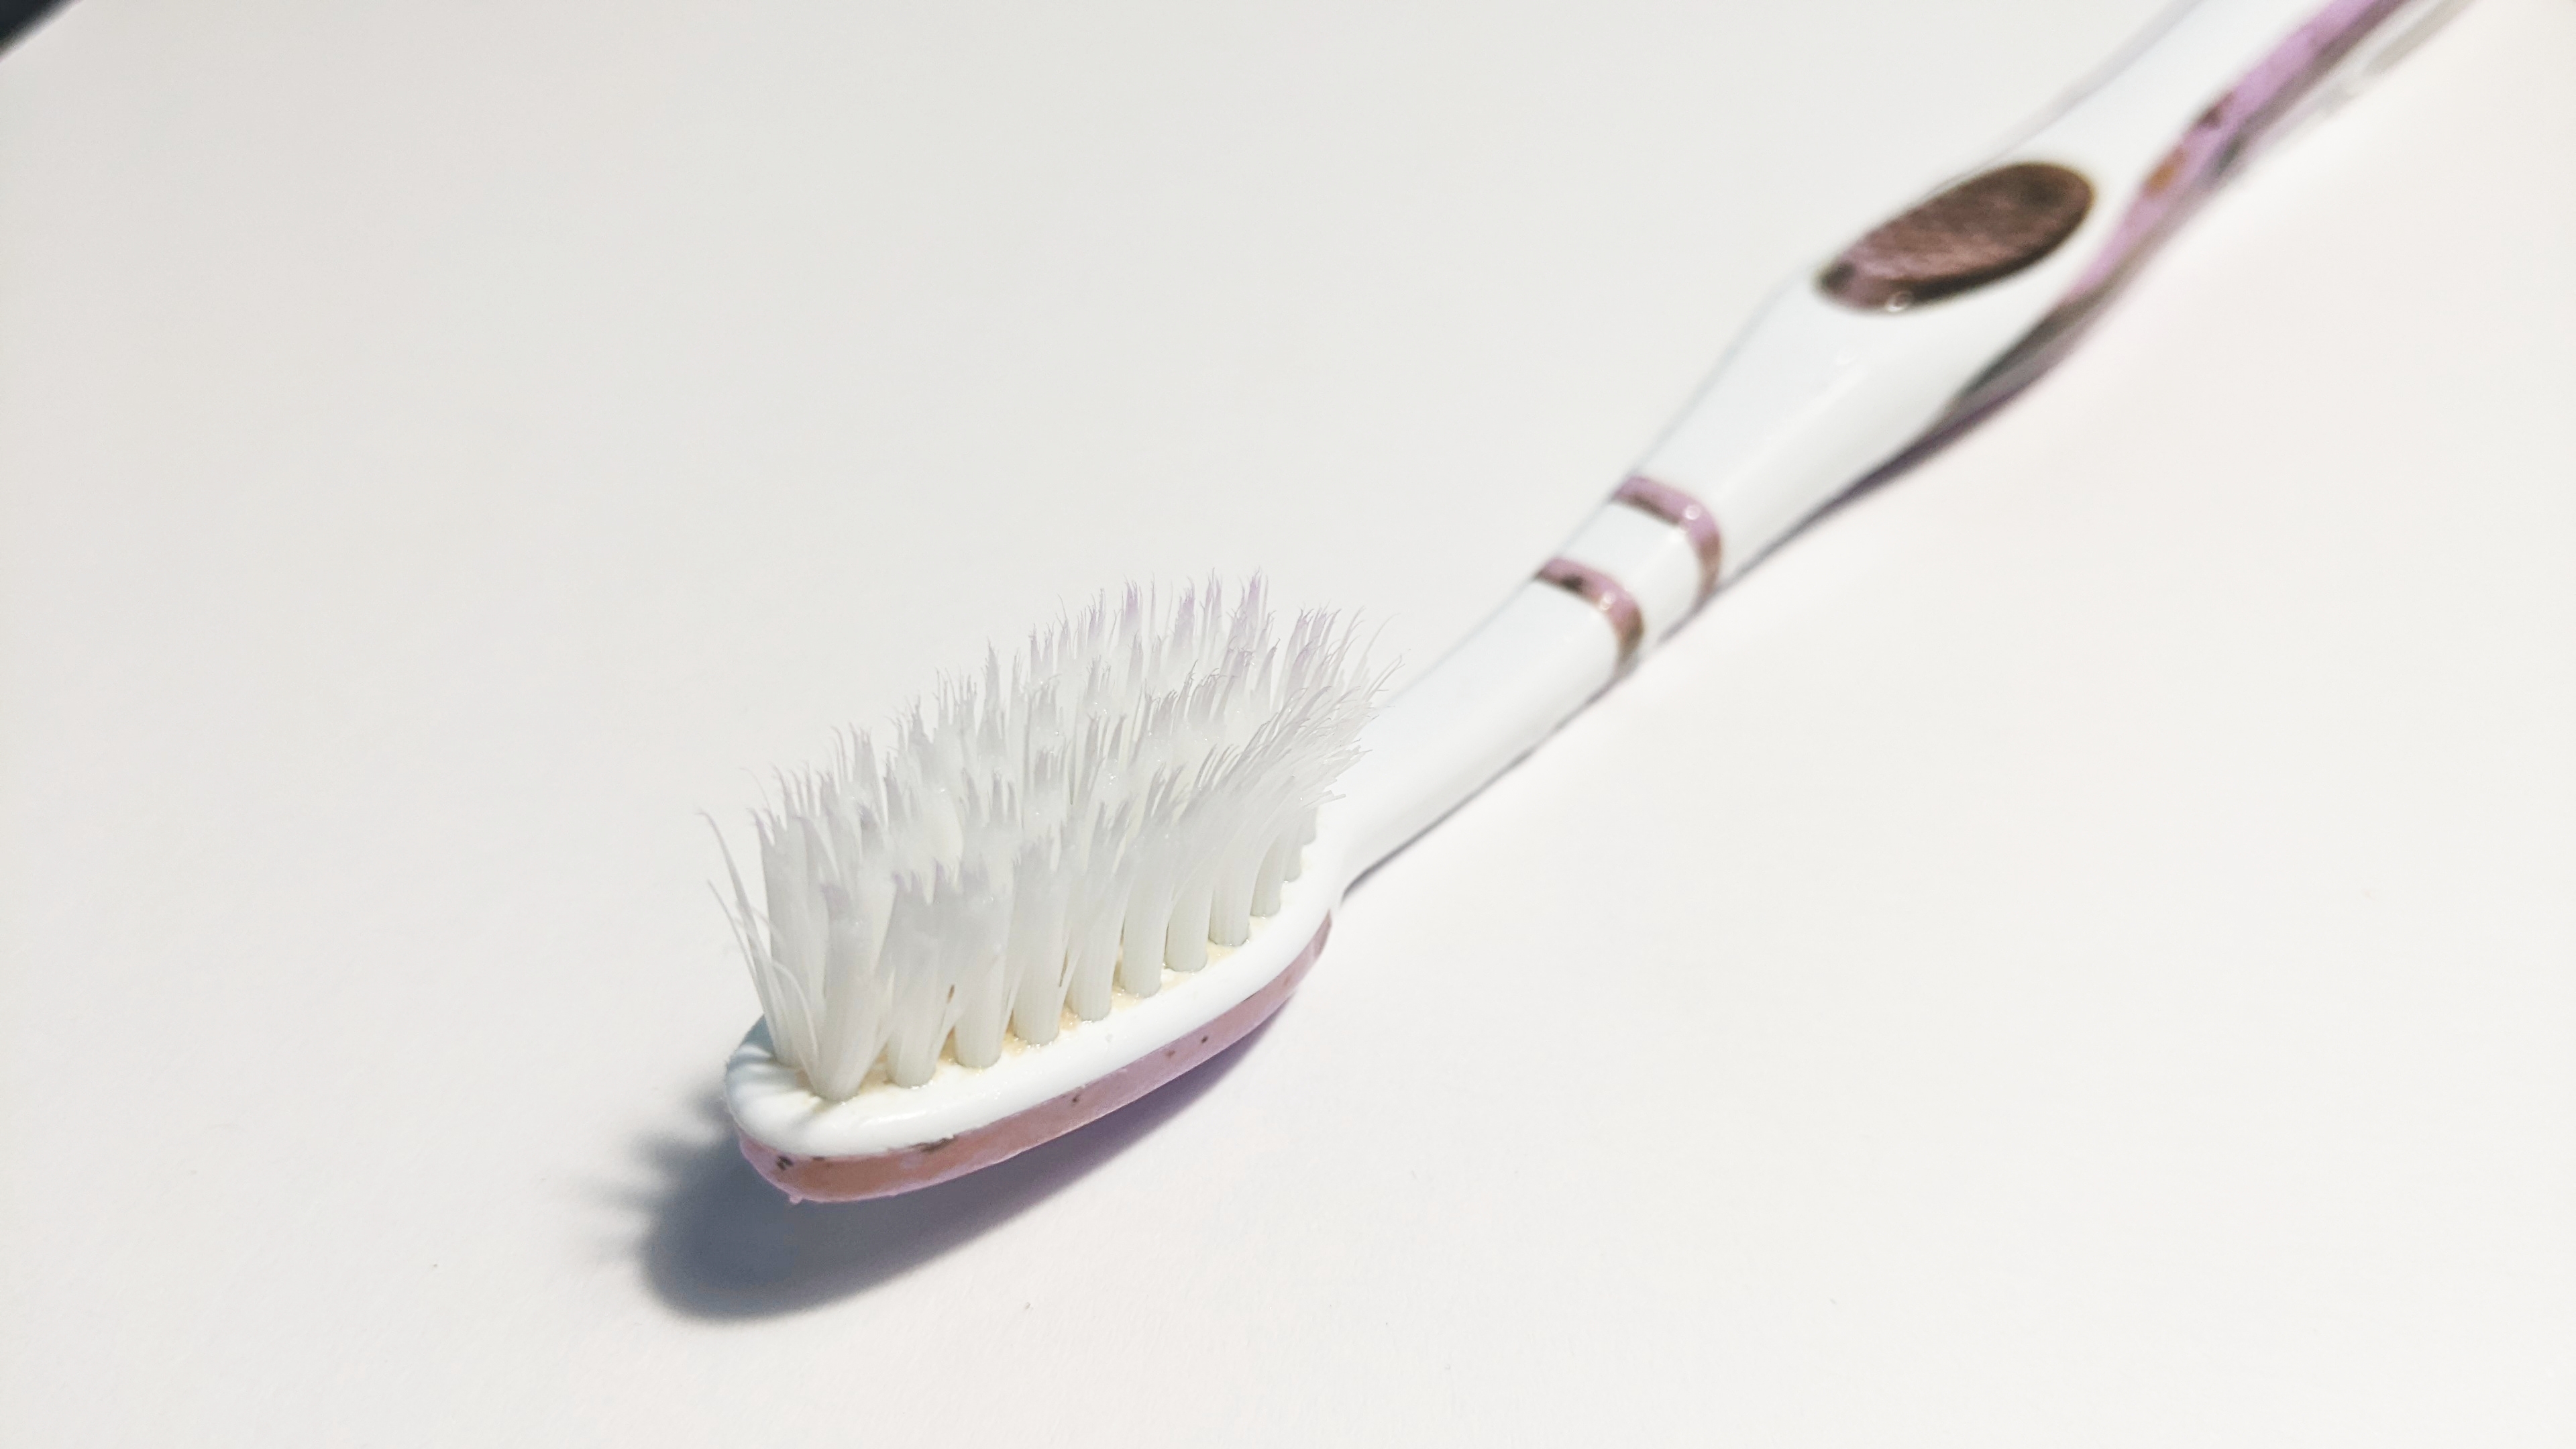 Jason made his daughter brush her teeth with the dirty toothbrush. | Source: Shutterstock